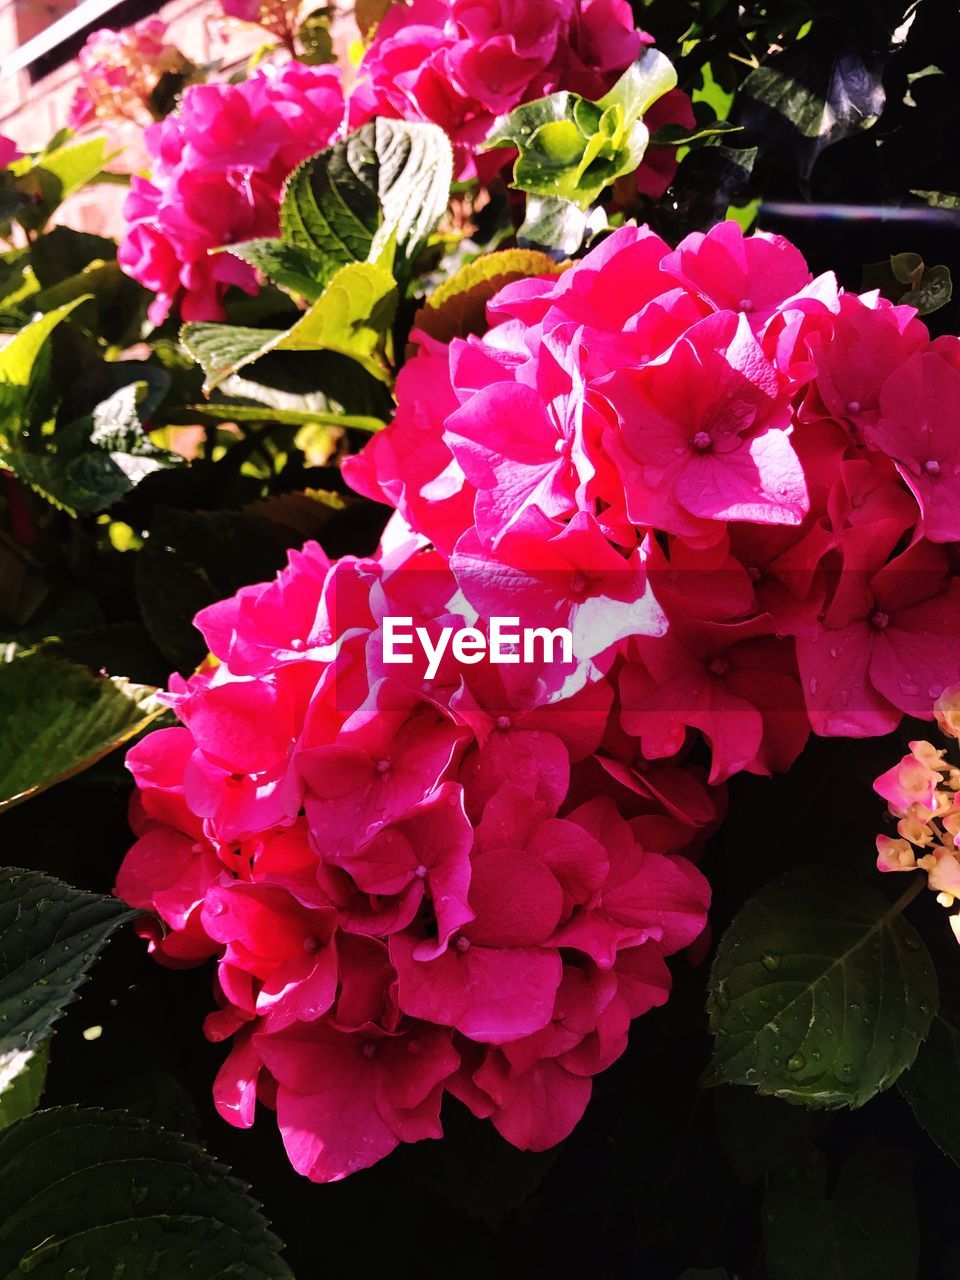 PINK HYDRANGEA BLOOMING OUTDOORS